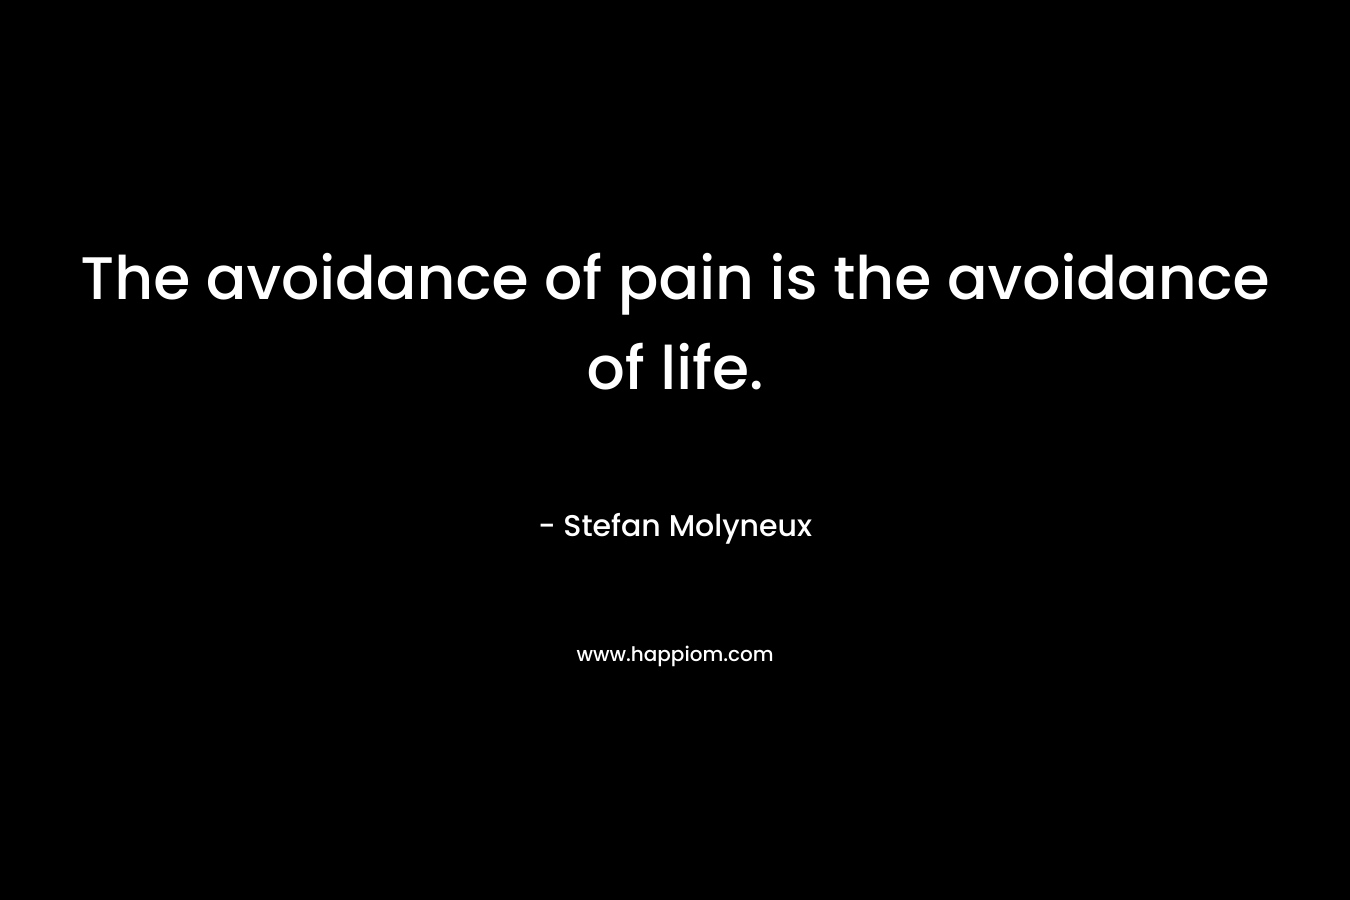 The avoidance of pain is the avoidance of life. – Stefan Molyneux